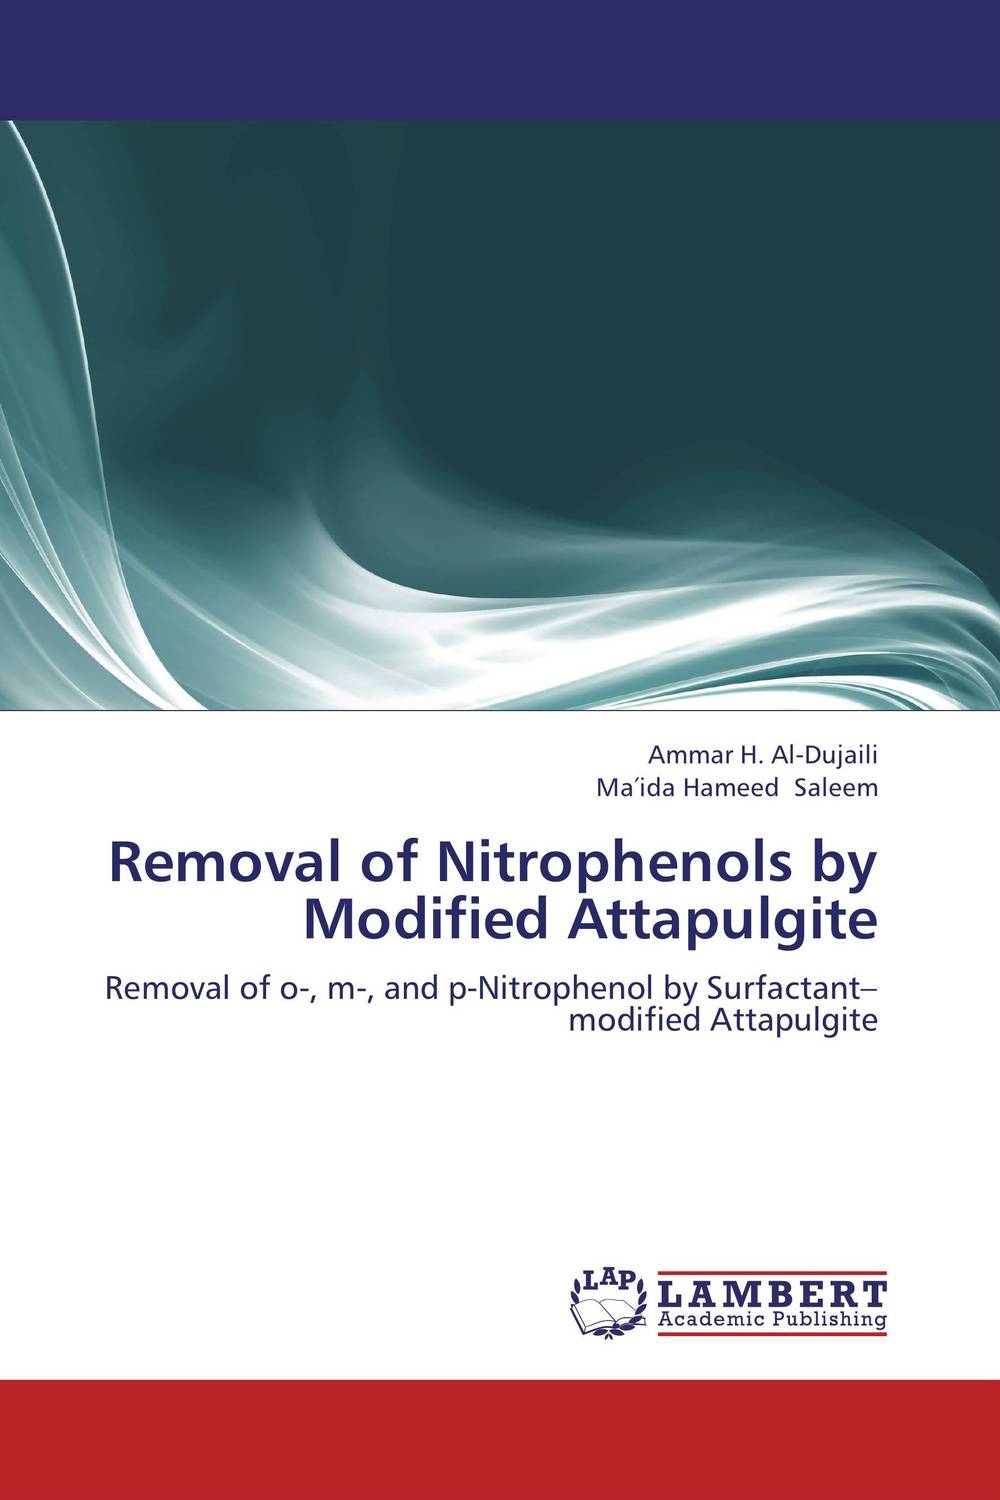 Removal of Nitrophenols by Modified Attapulgite